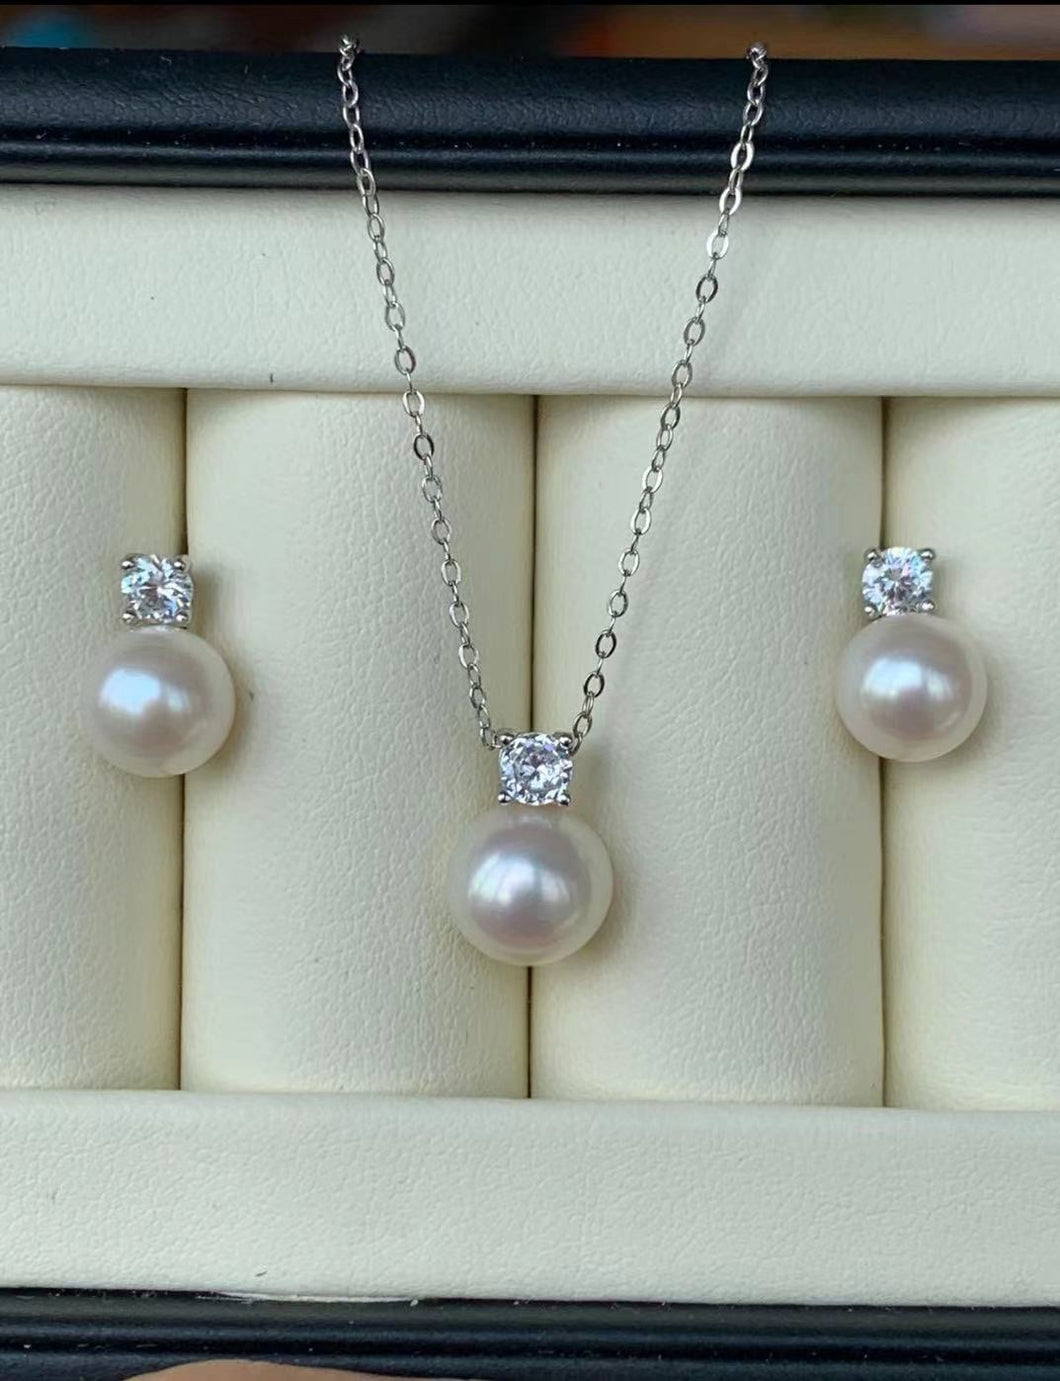 Princes Diane design freshwater pearl earrings and pendant